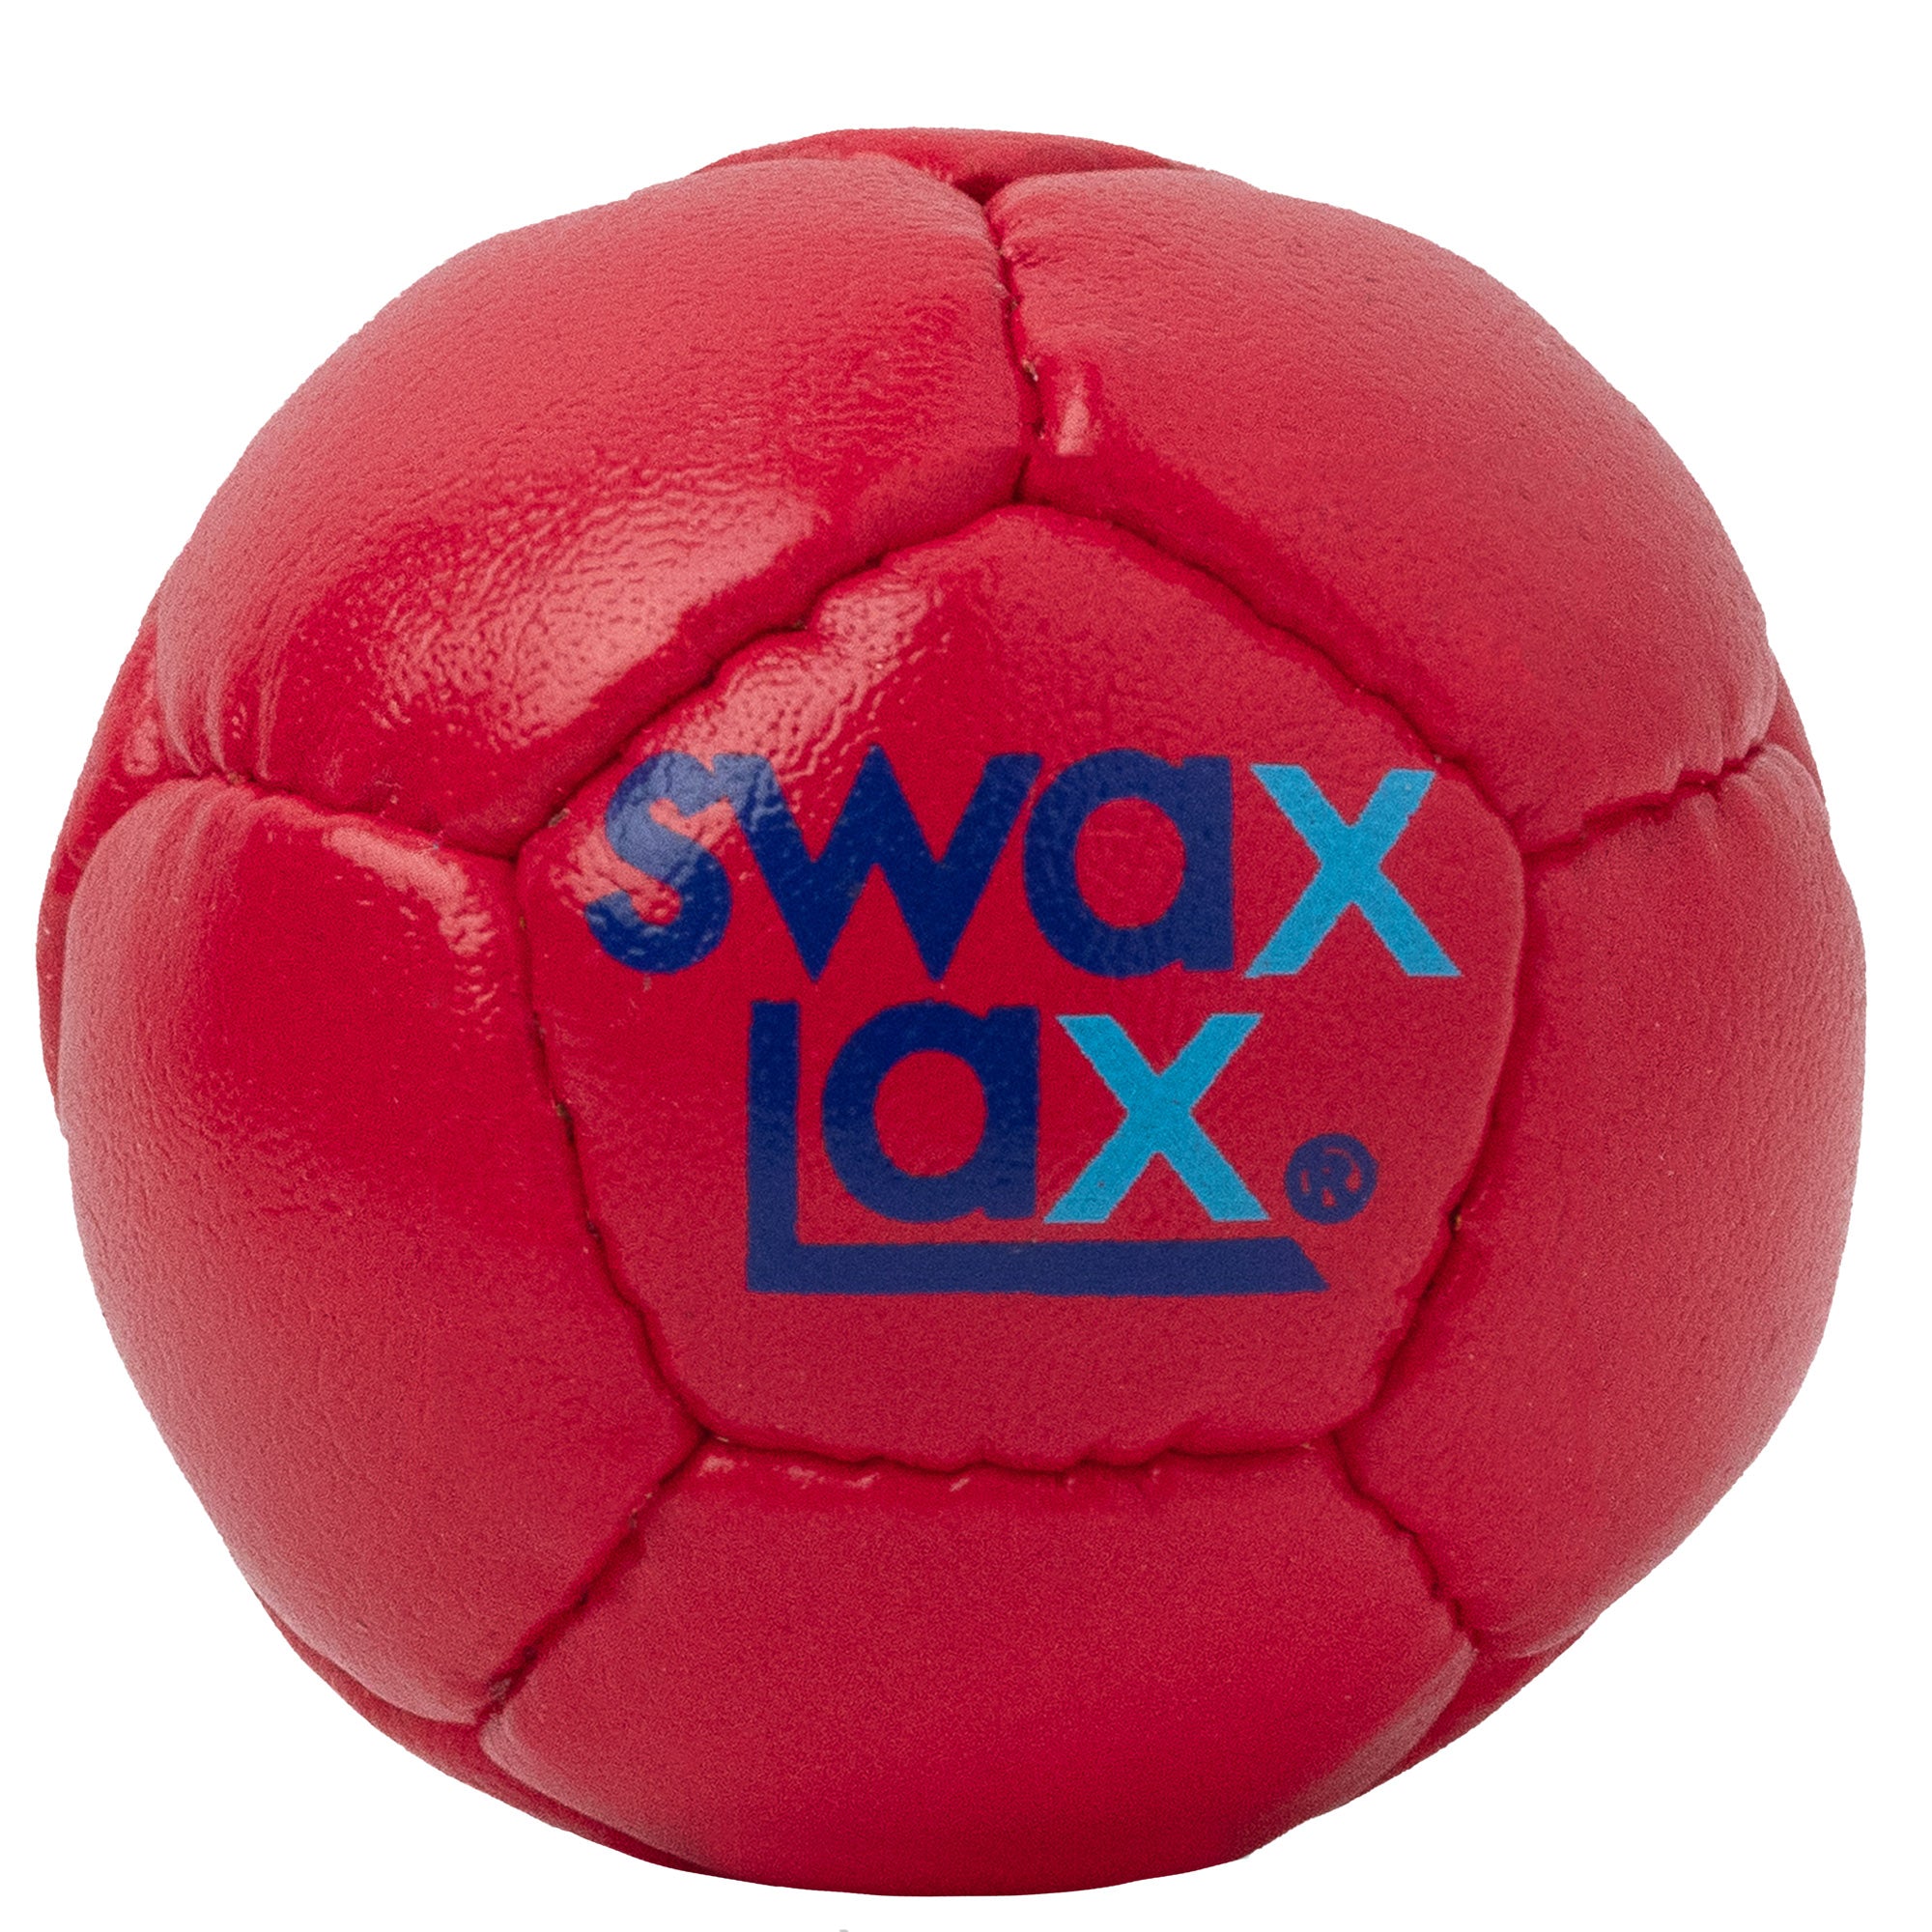 Red Swax Lax Lacrosse training ball - front view